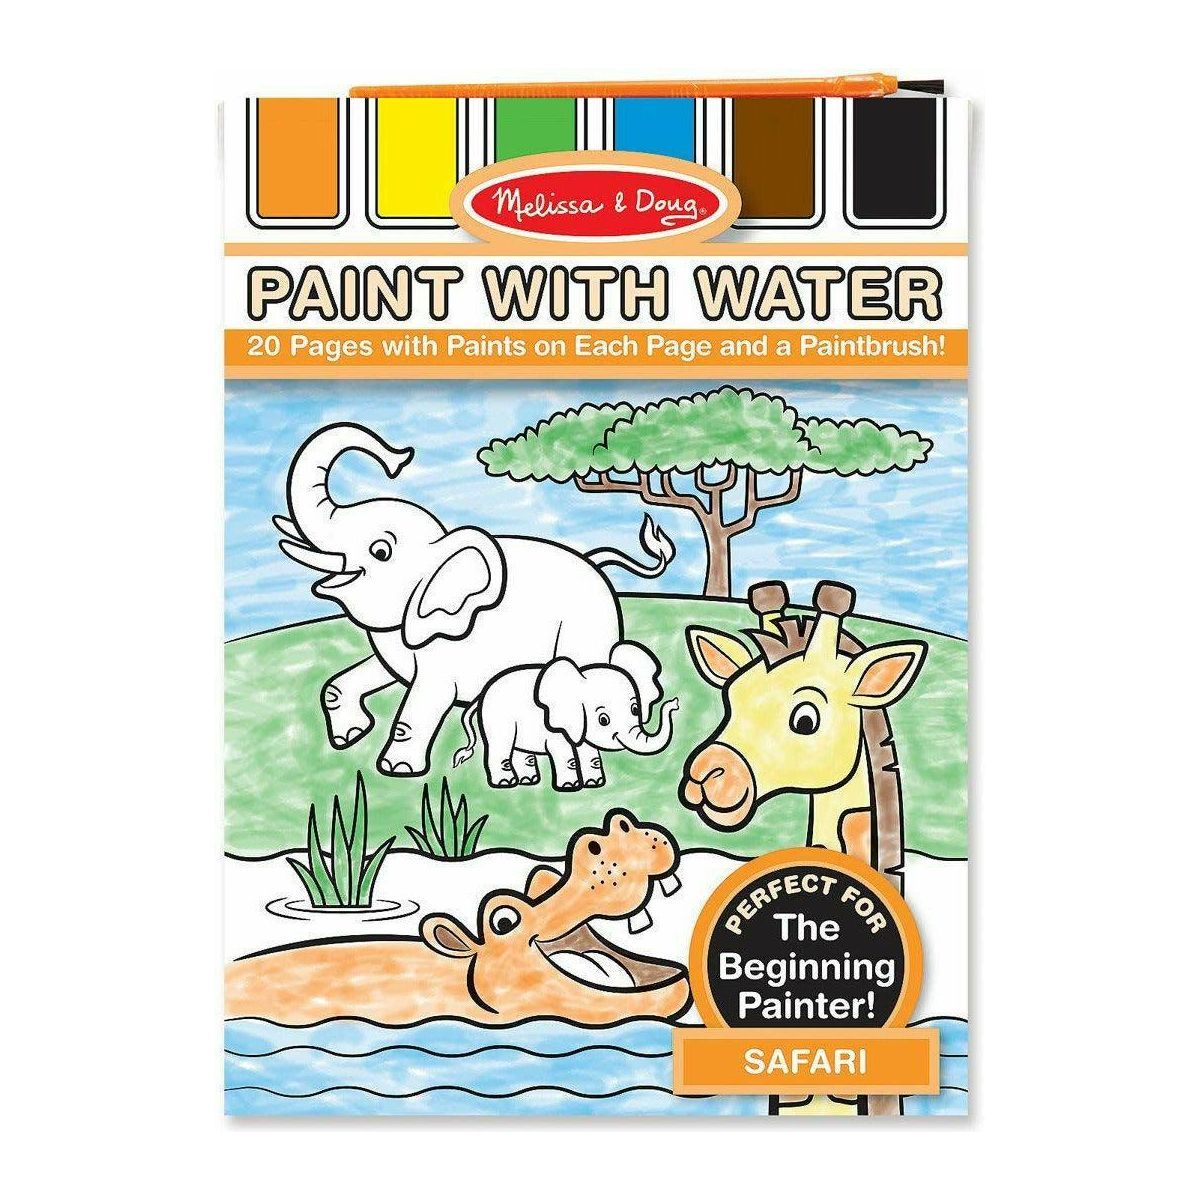 Melissa & Doug Paint With Water Activity Books - BumbleToys - 2-4 Years, Blackboards & Easels, Boys, Girls, OXE, Pre-Order